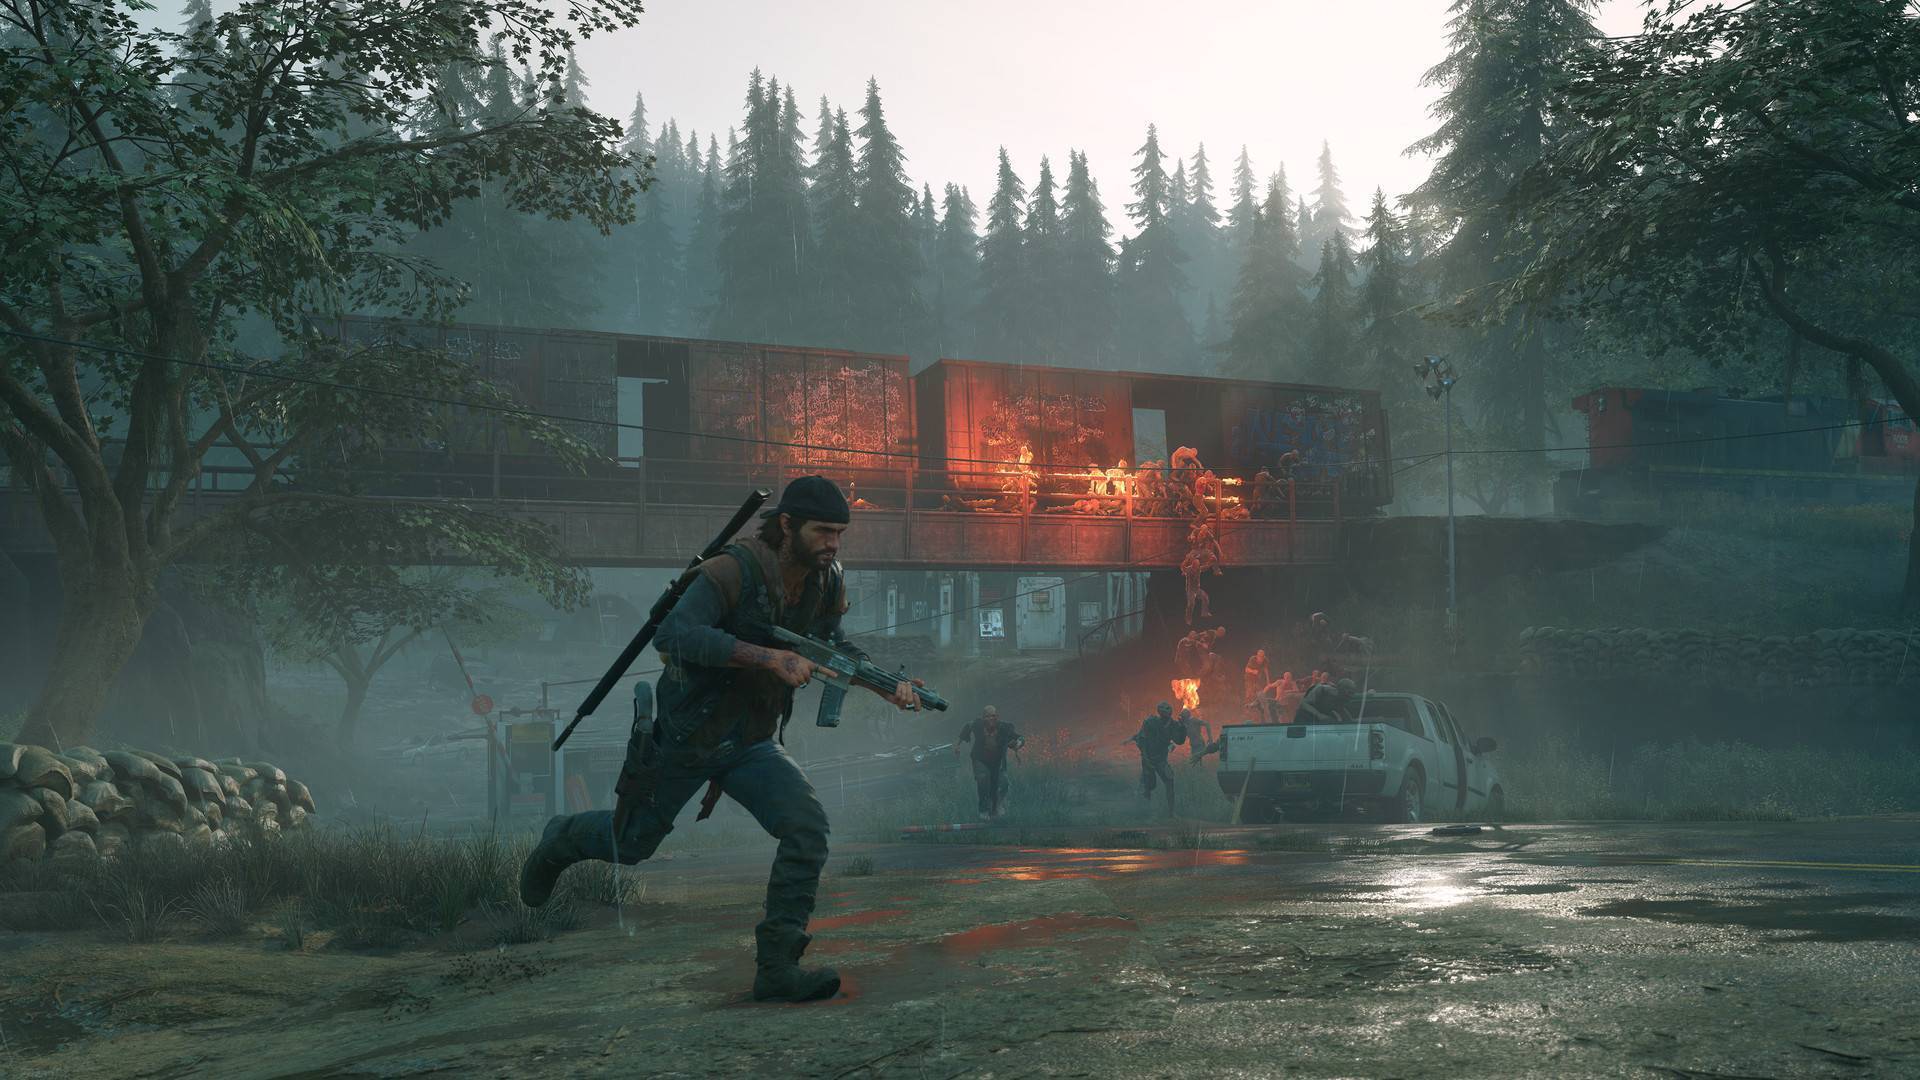 Days Gone (PC) Key cheap - Price of $9.99 for Steam